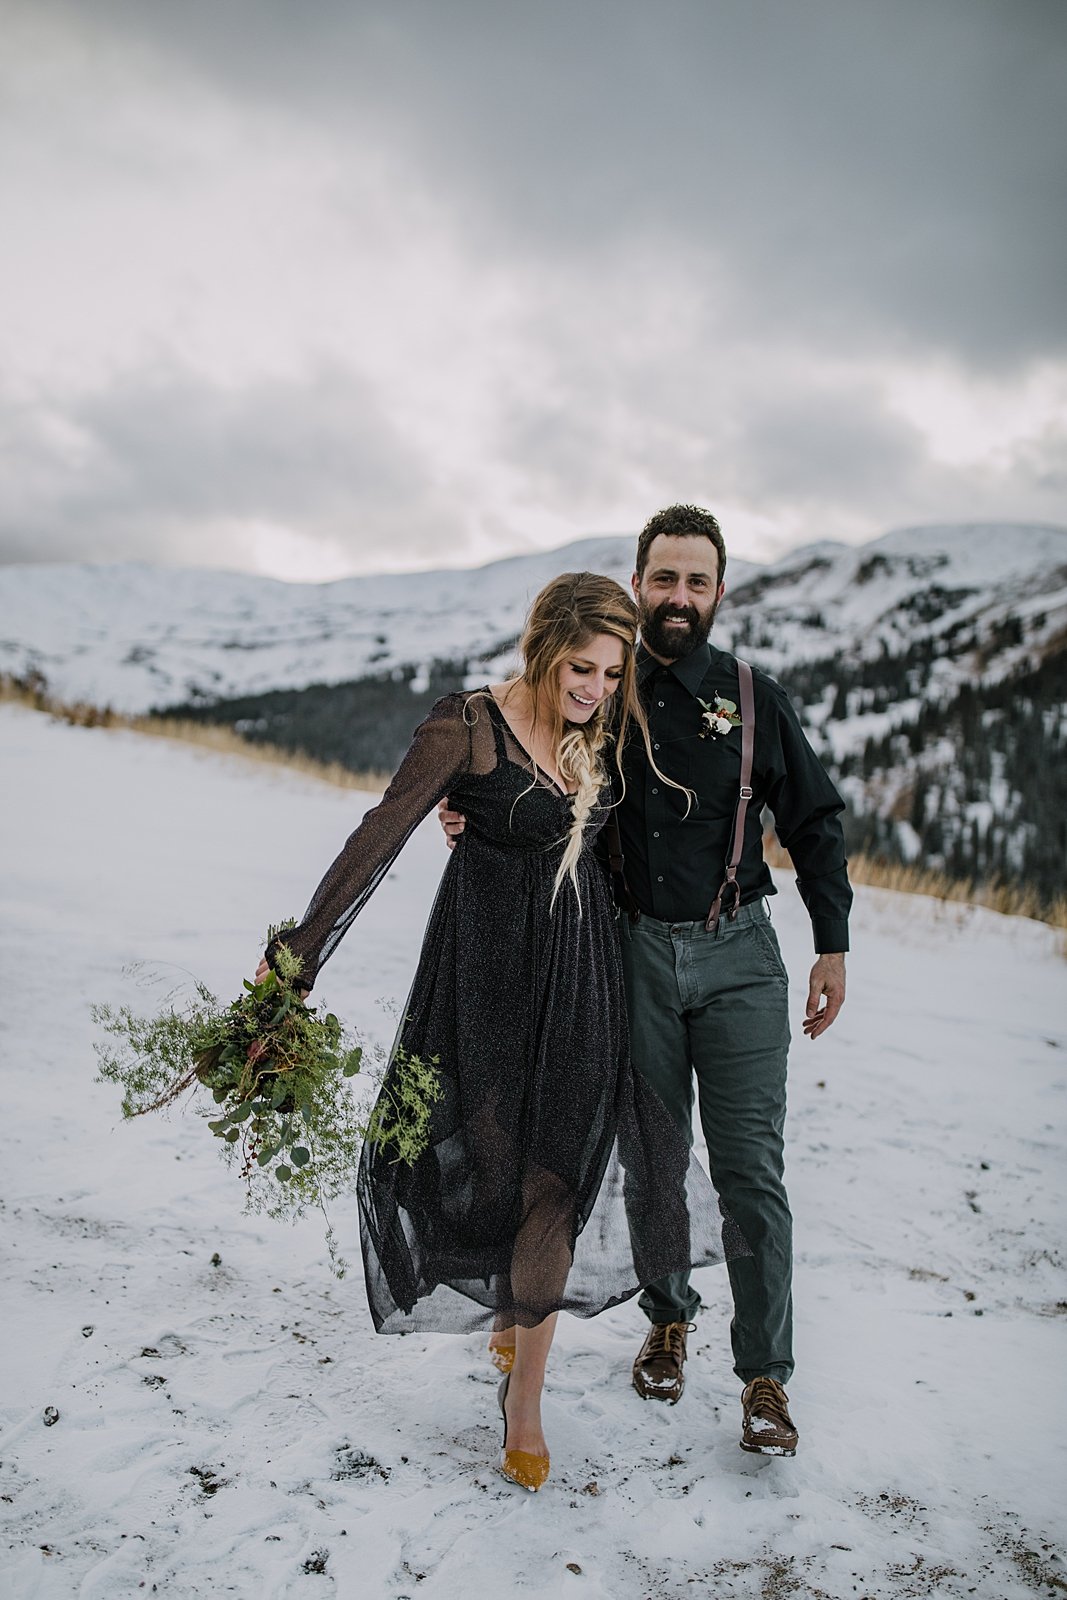 bride and groom walking across snow together, snowy mountainside elopement, whispy fall mountain bridal bouquet, snowy mountain peak wedding backdrop, celestial wedding dress